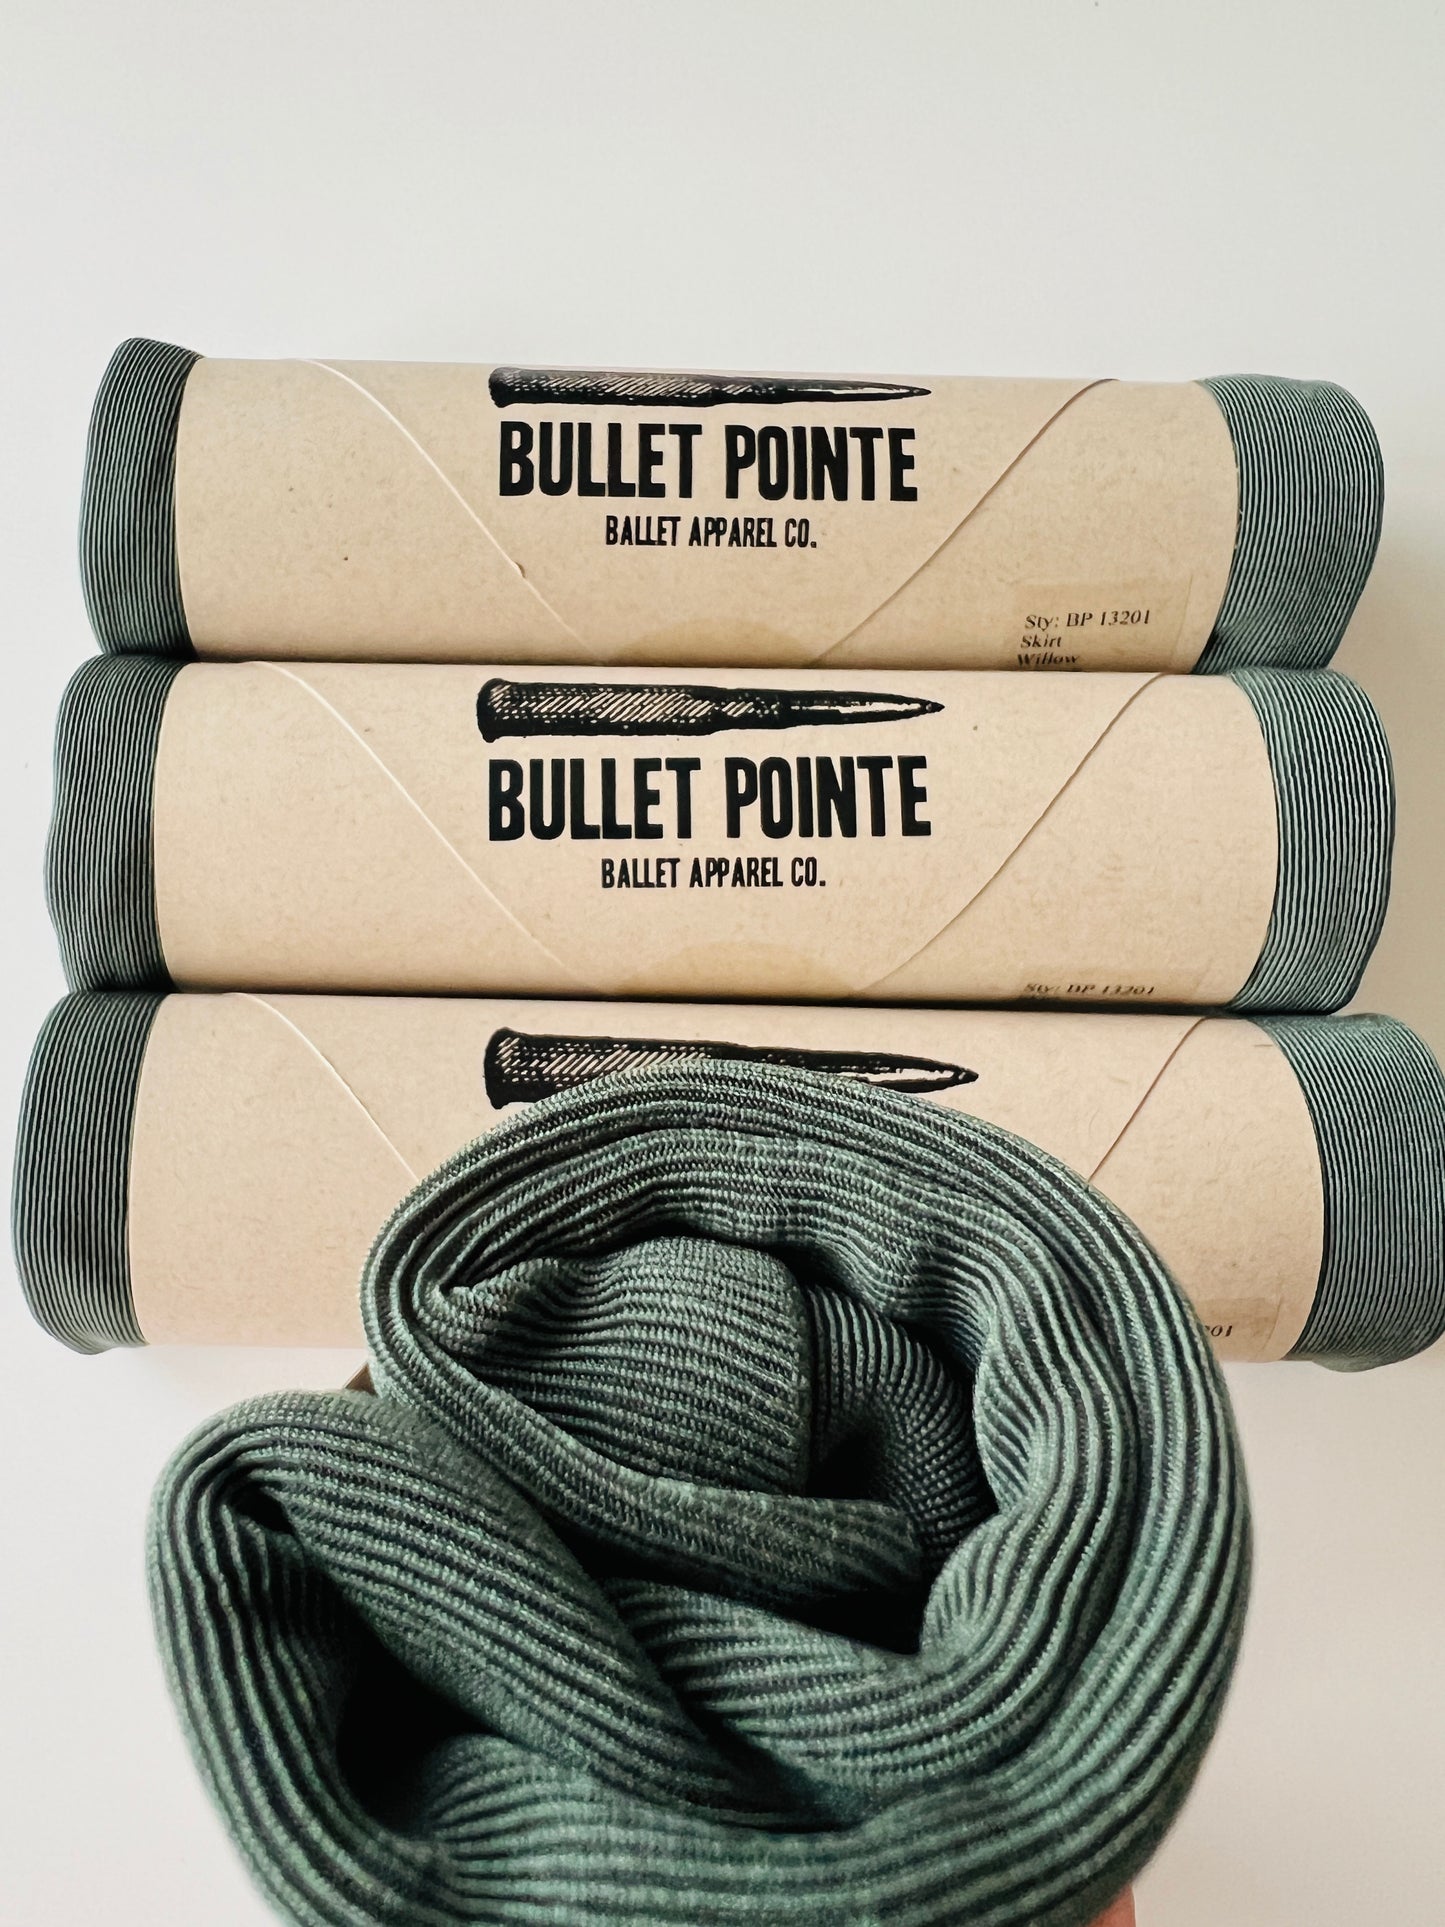 Bullet Pointe ballet SAB Skirt in Willow Green Willow Olive from the collective dancewear